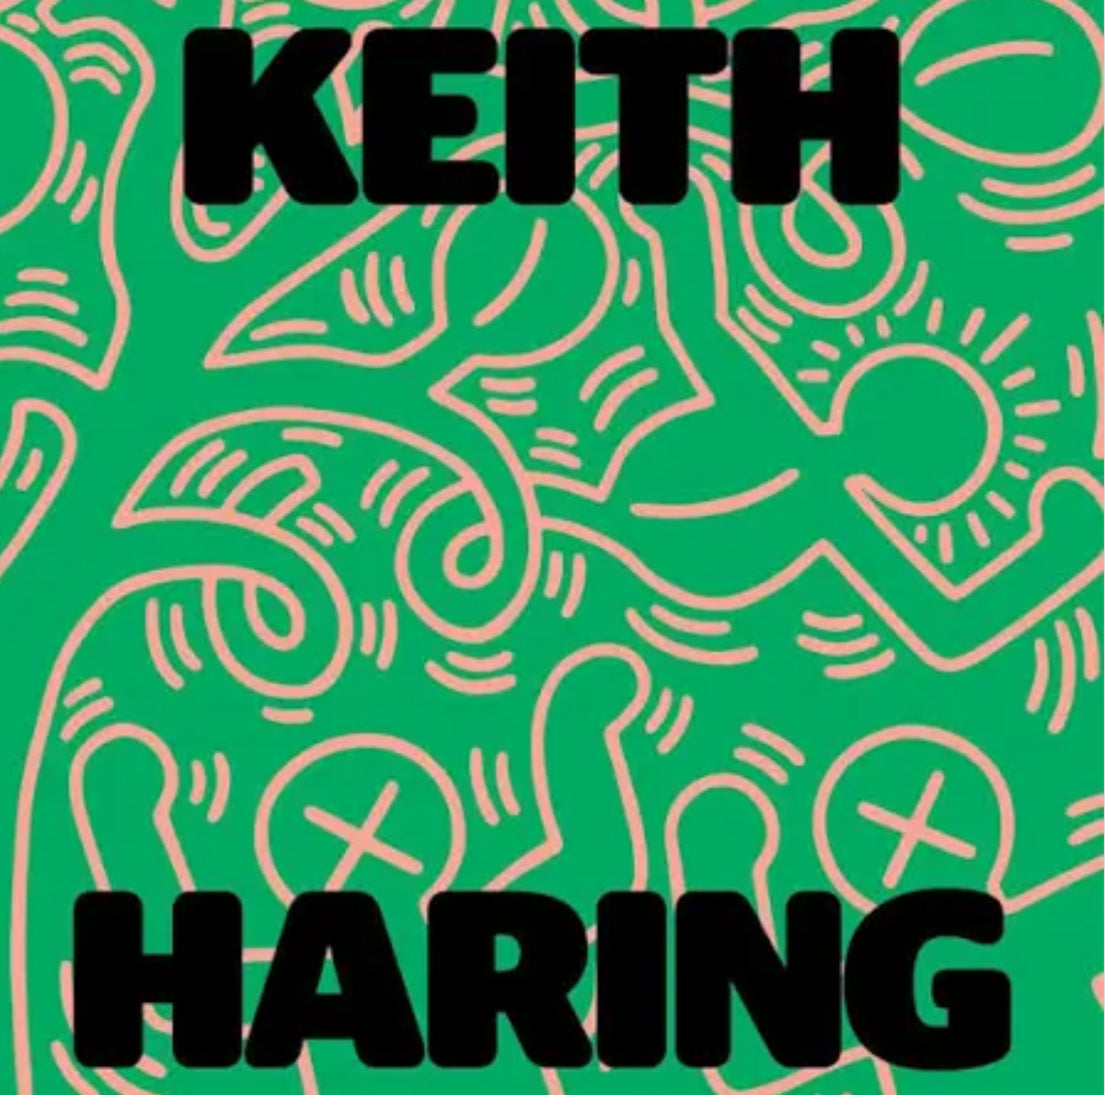 Keith Harring: Art is for Everbody